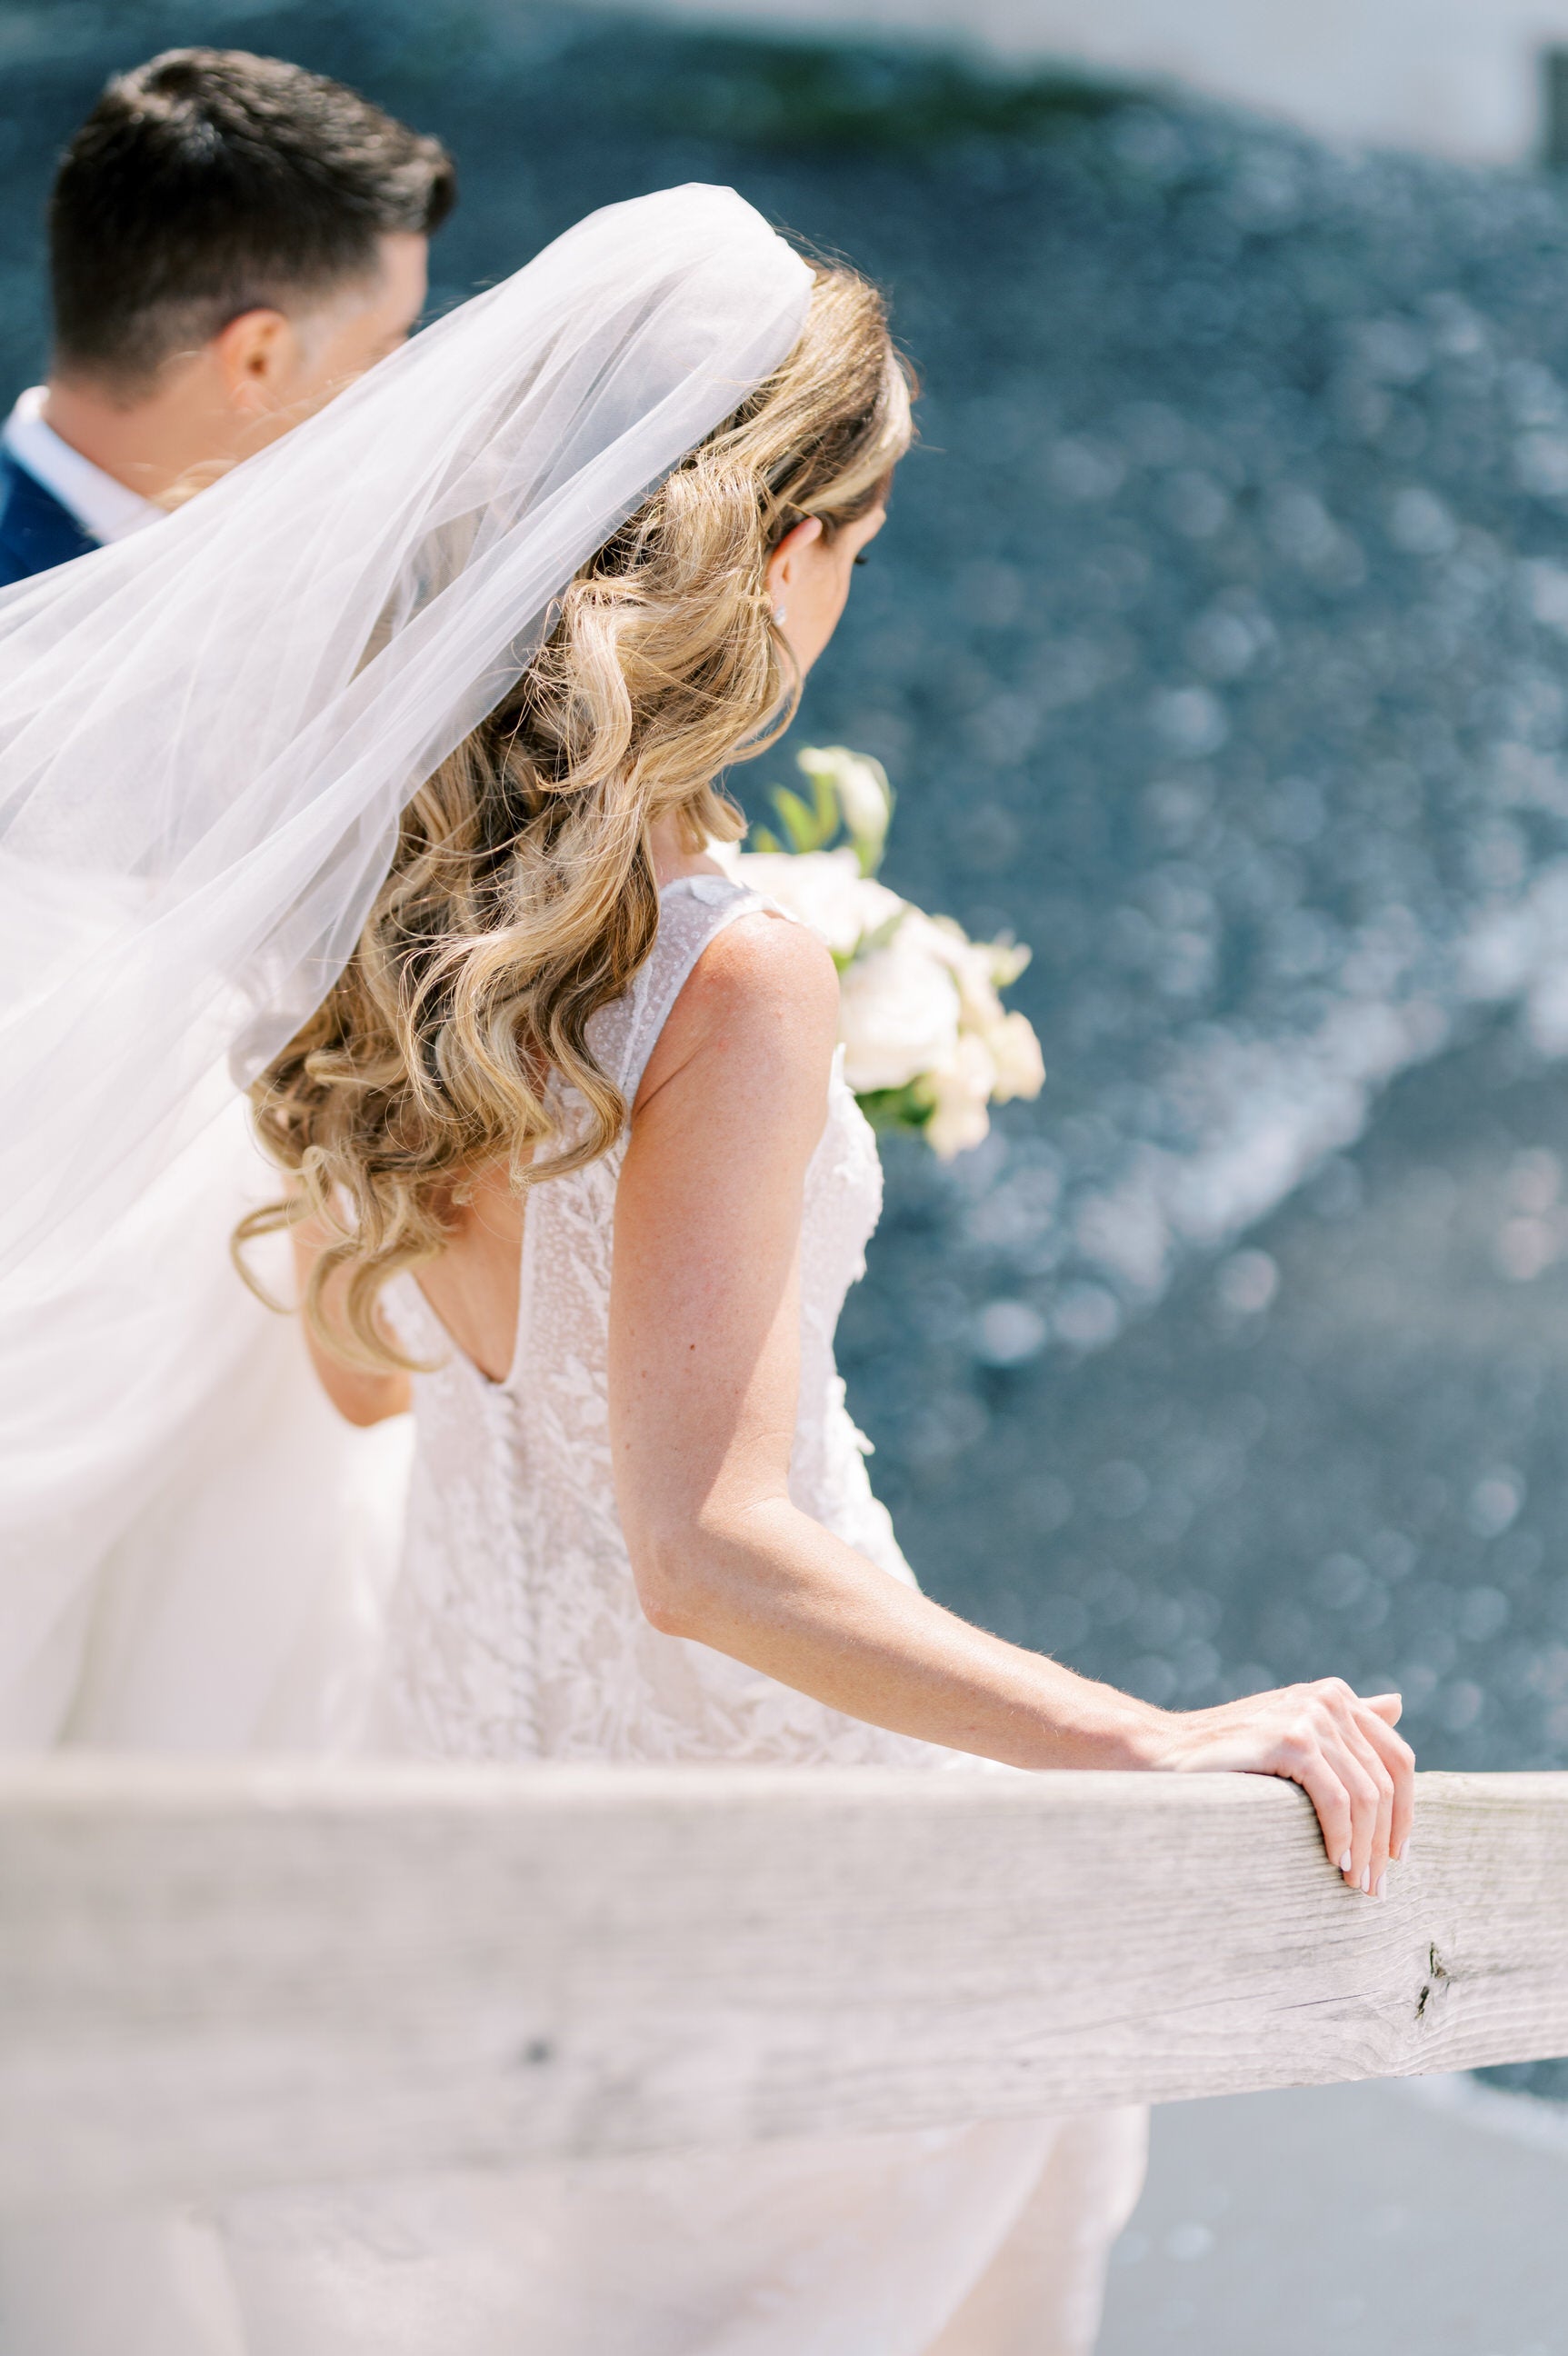 The Most Beautiful Bridal Veils and Headpieces for Every Wedding Style